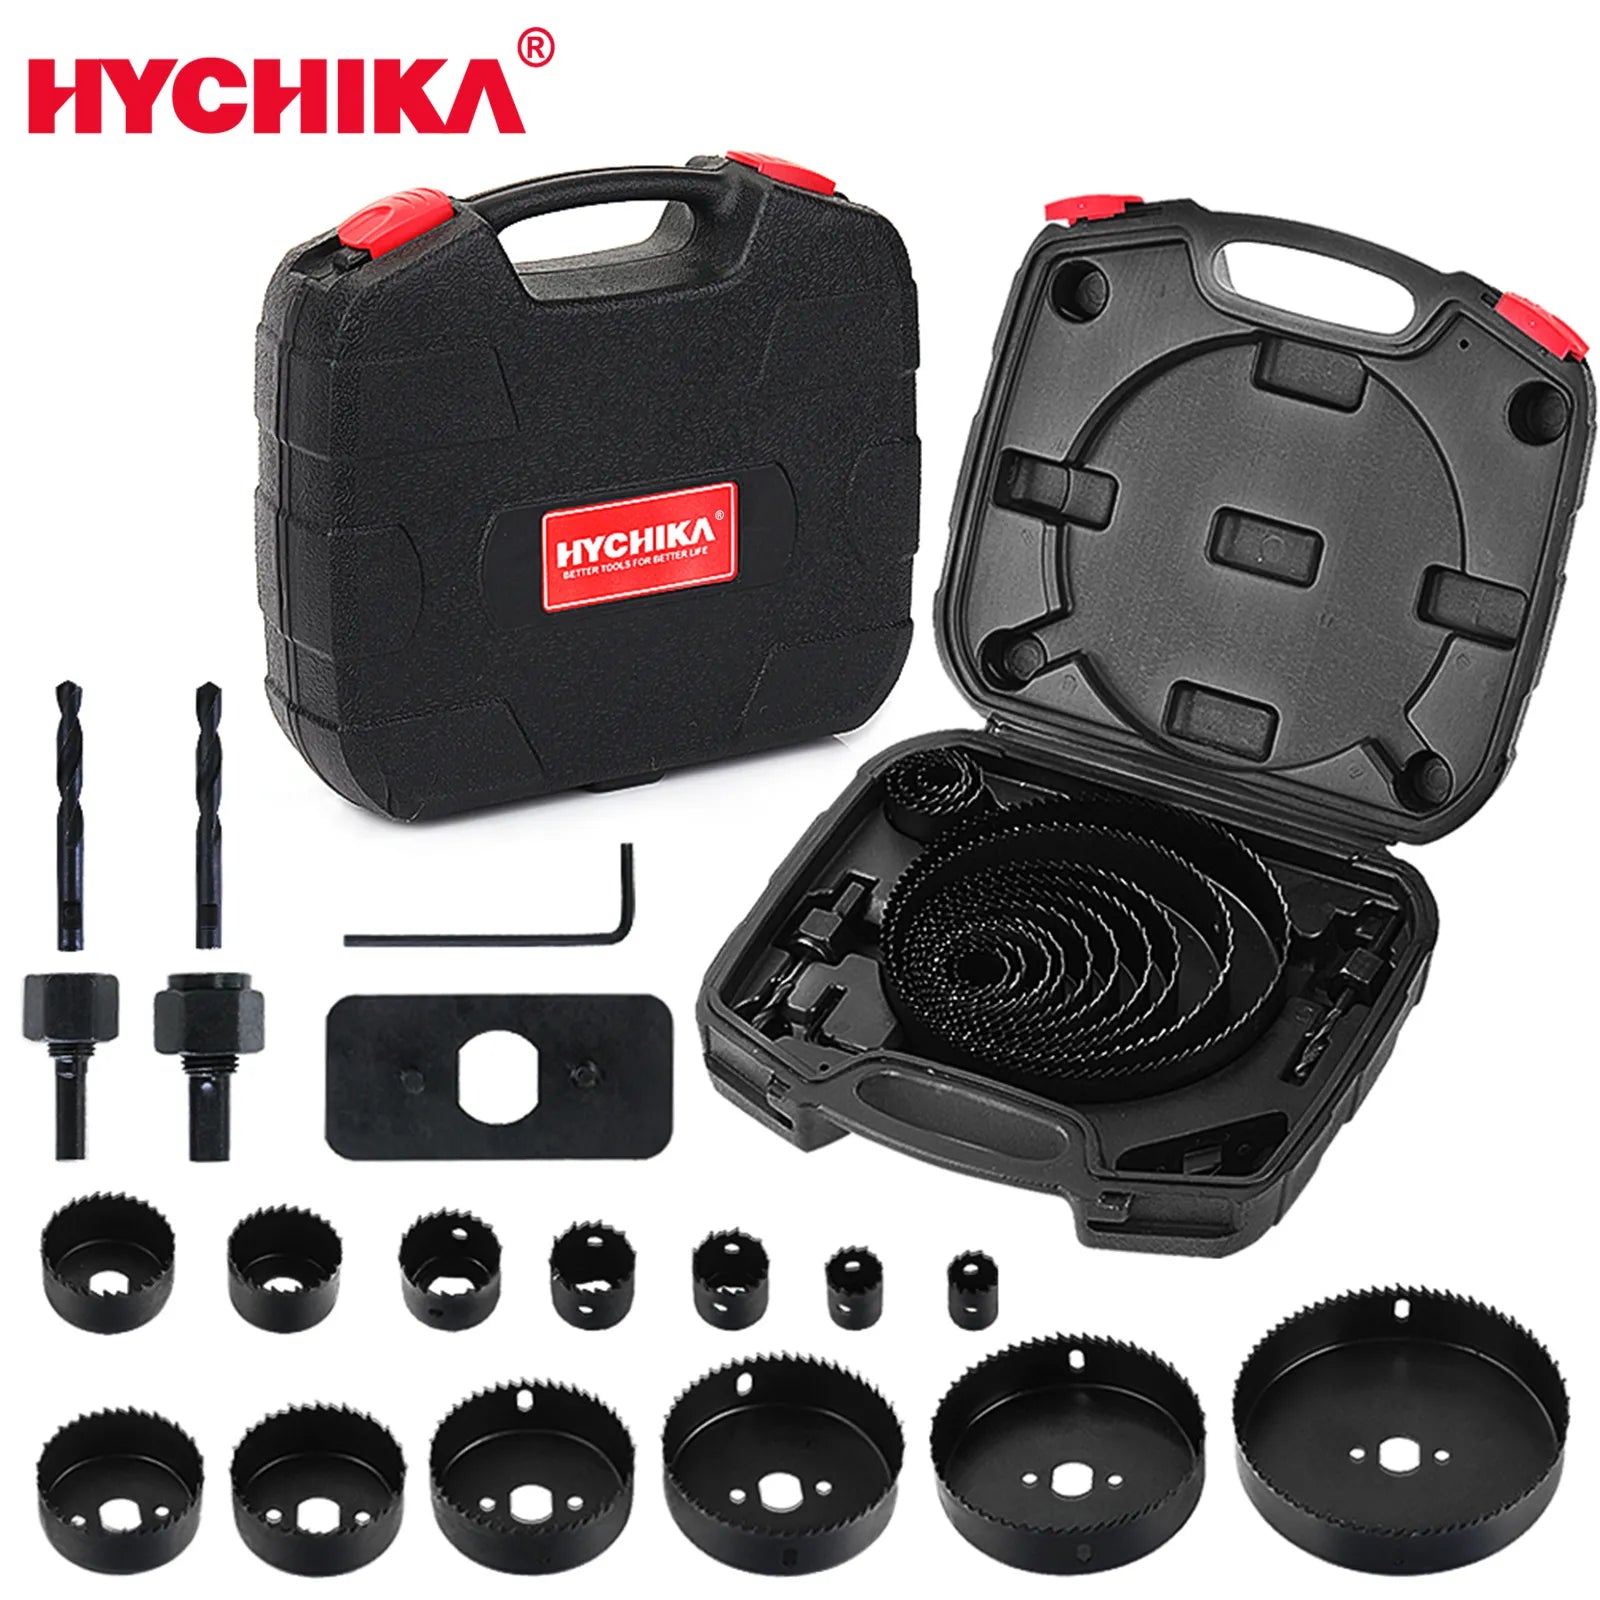 HYCHIKA Hole Saw Cutting Set Kit 19 Pcs Hole Saw Kit with 13Pcs Saw Blades 2 Drill Bits for Soft Wood Plywood Drywall PVC - RY MARKET PLACE